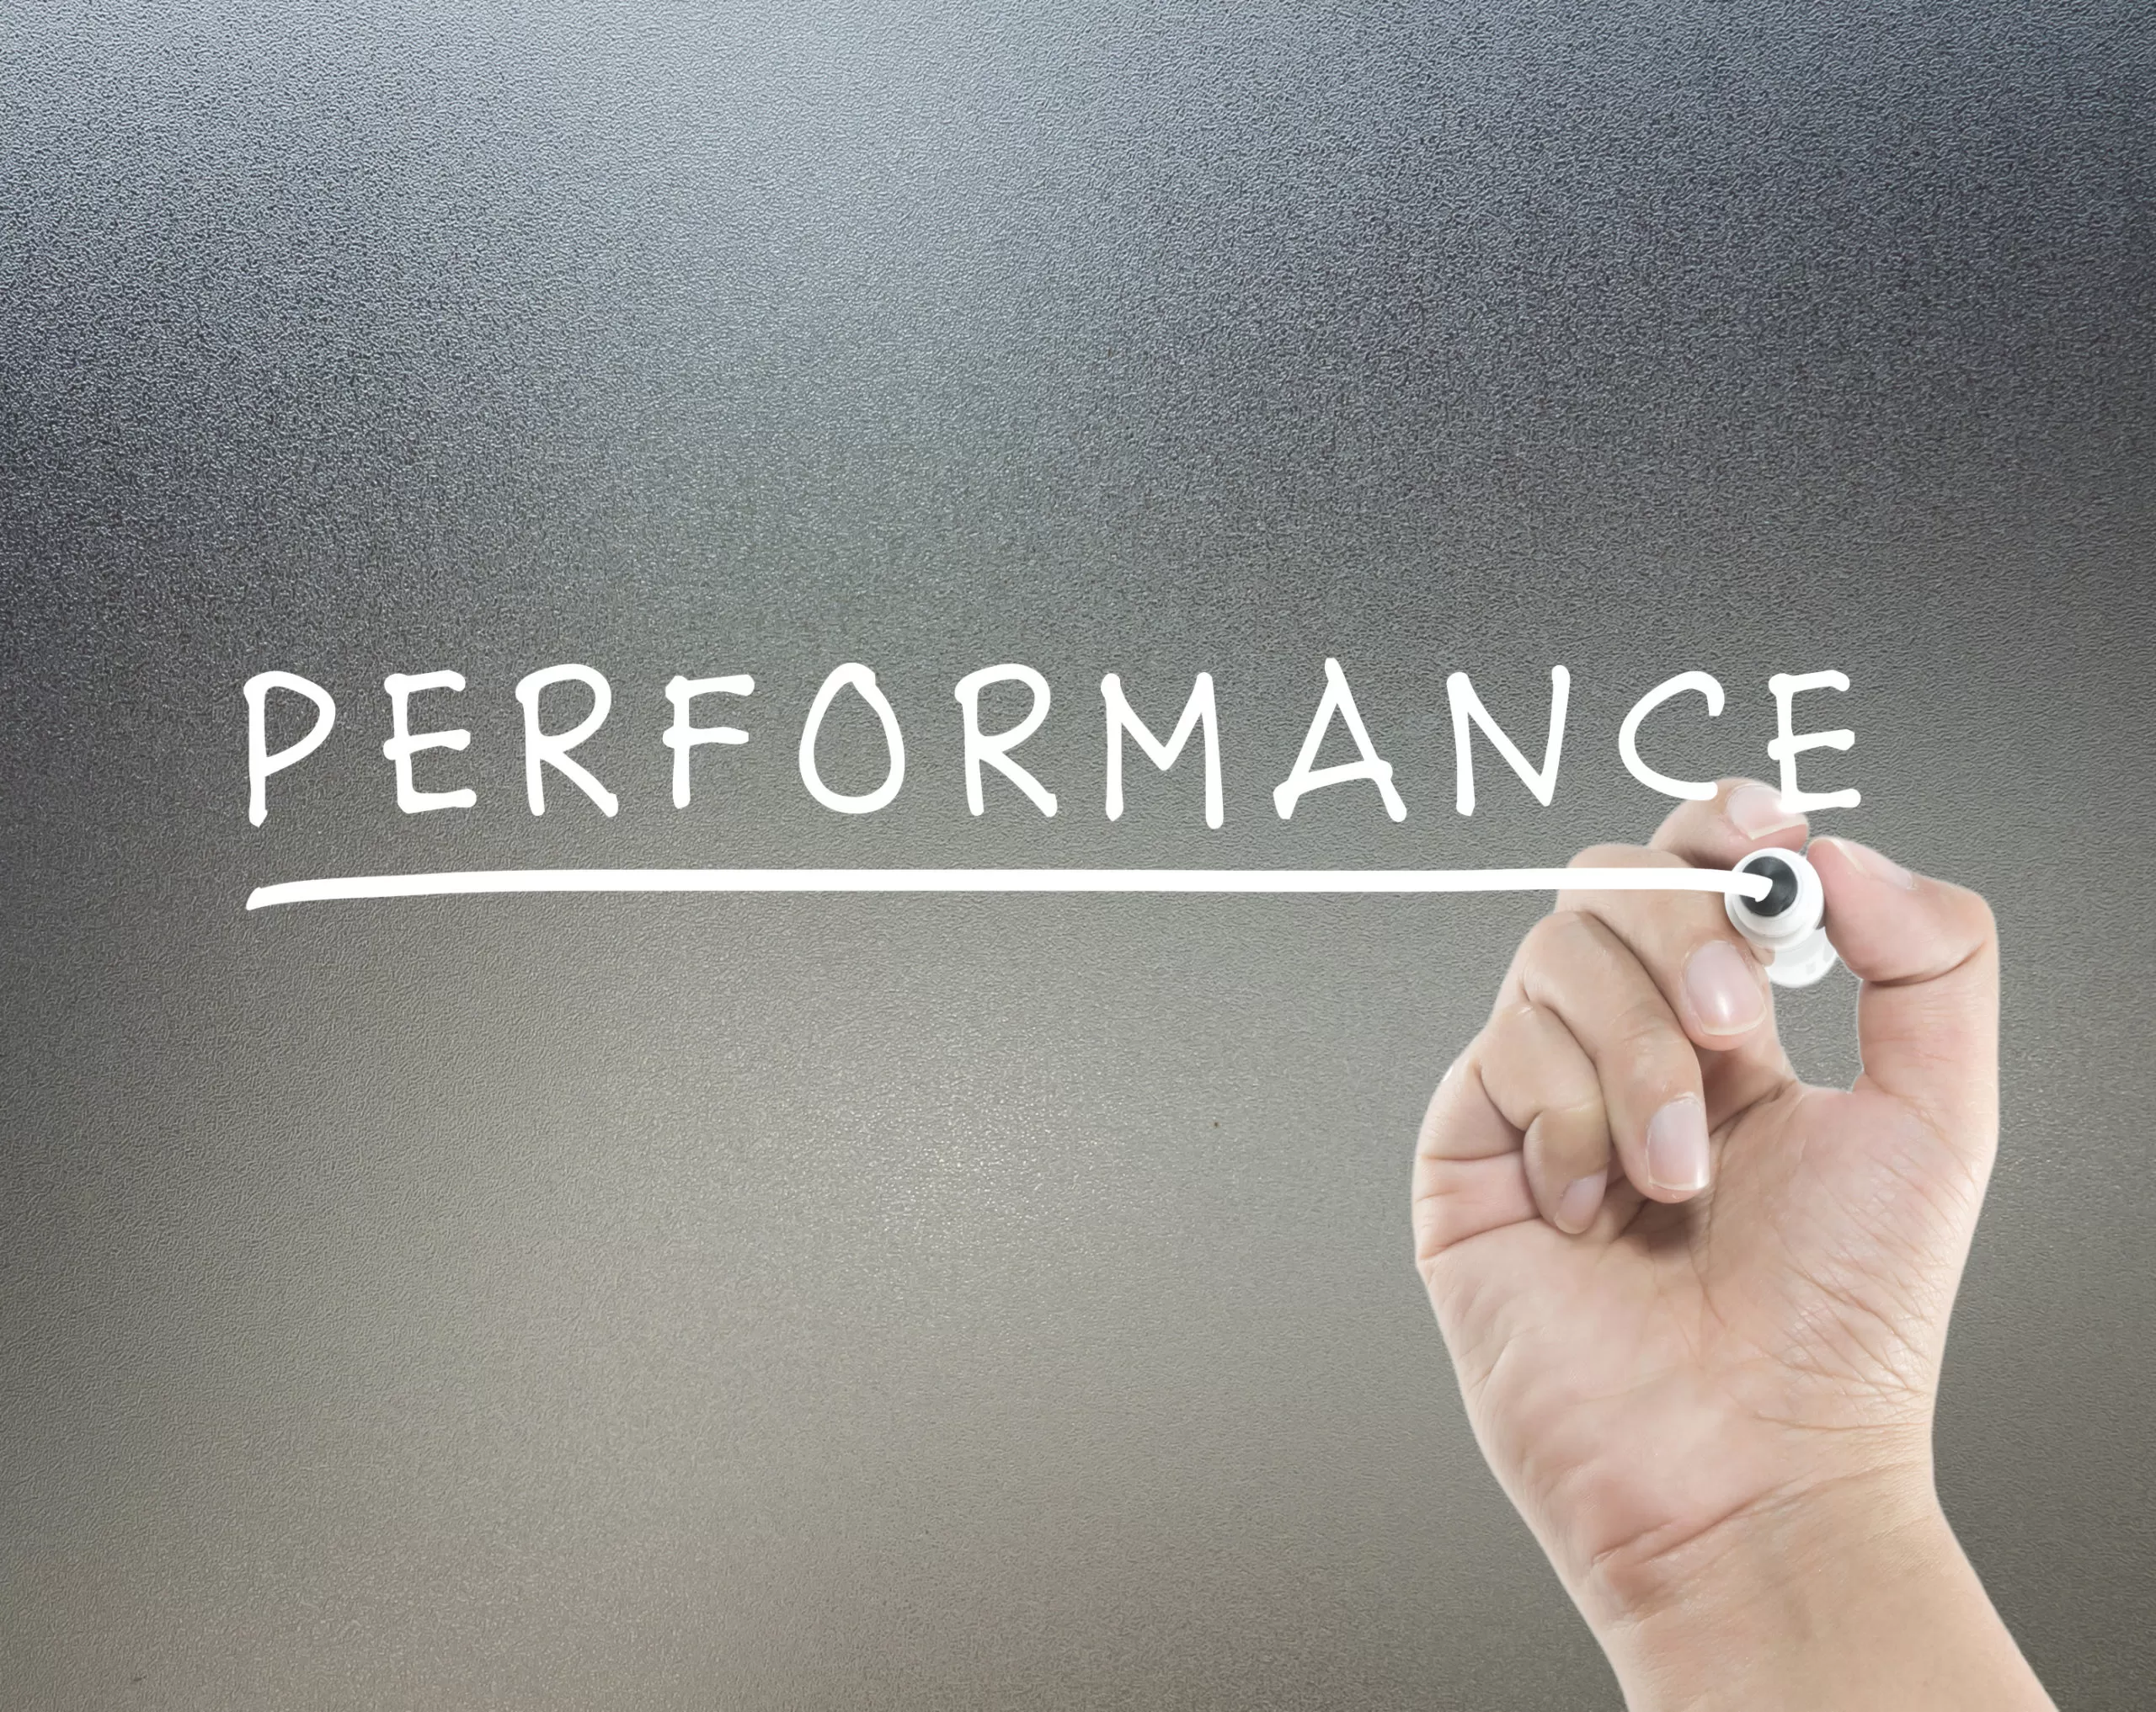 Benefits of Using Performance Review Software